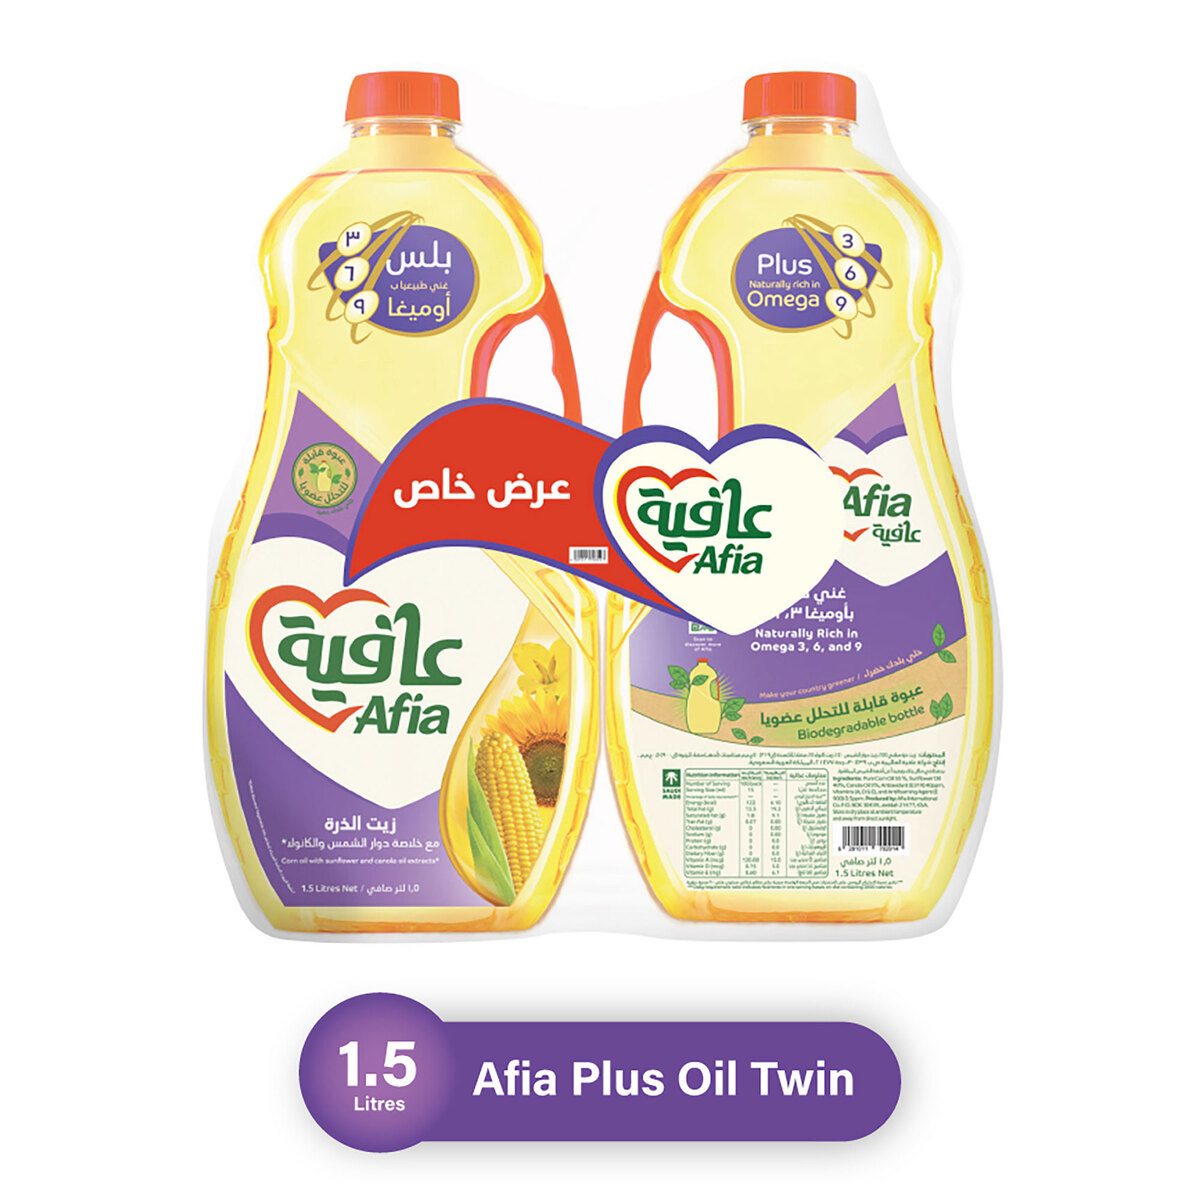 Buy Afia Plus Omega 3 Corn Oil With Sunflower And Canola Oil Extracts 2 x 1.5 Litres Online at Best Price | Corn Oil | Lulu KSA in Saudi Arabia